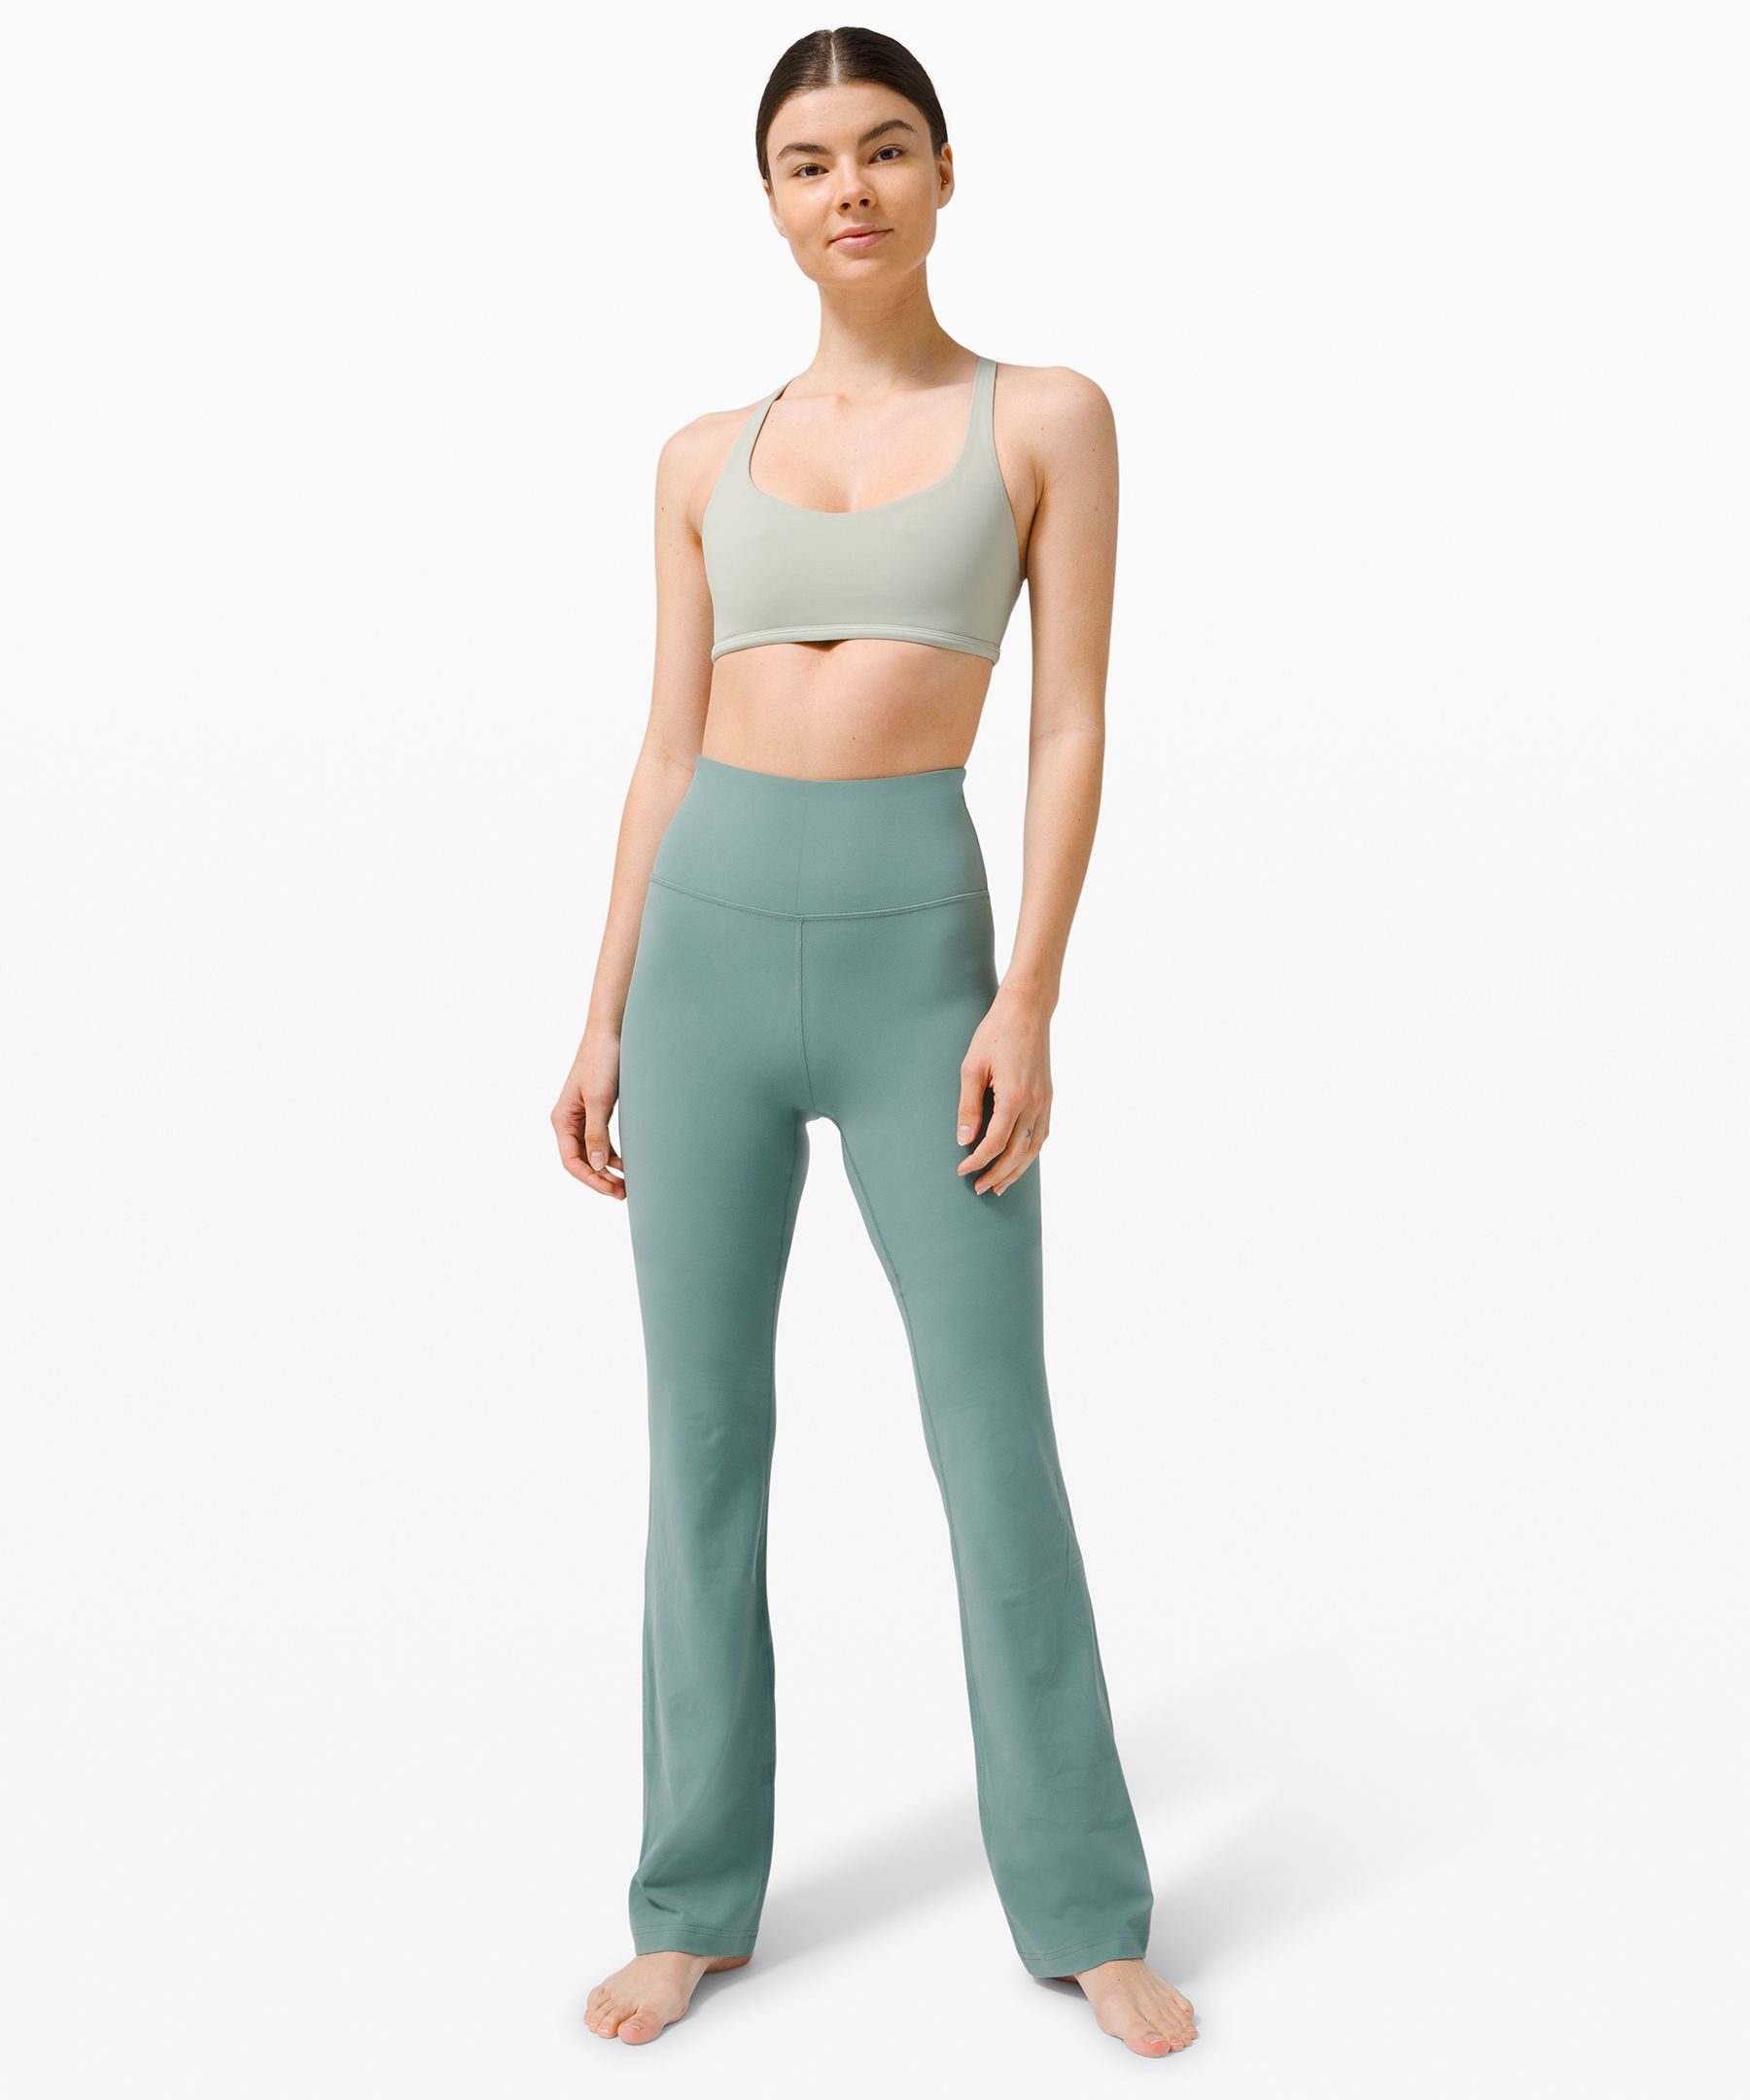 Lululemon Groove Pant Flare Nulu Marketplace  International Society of  Precision Agriculture